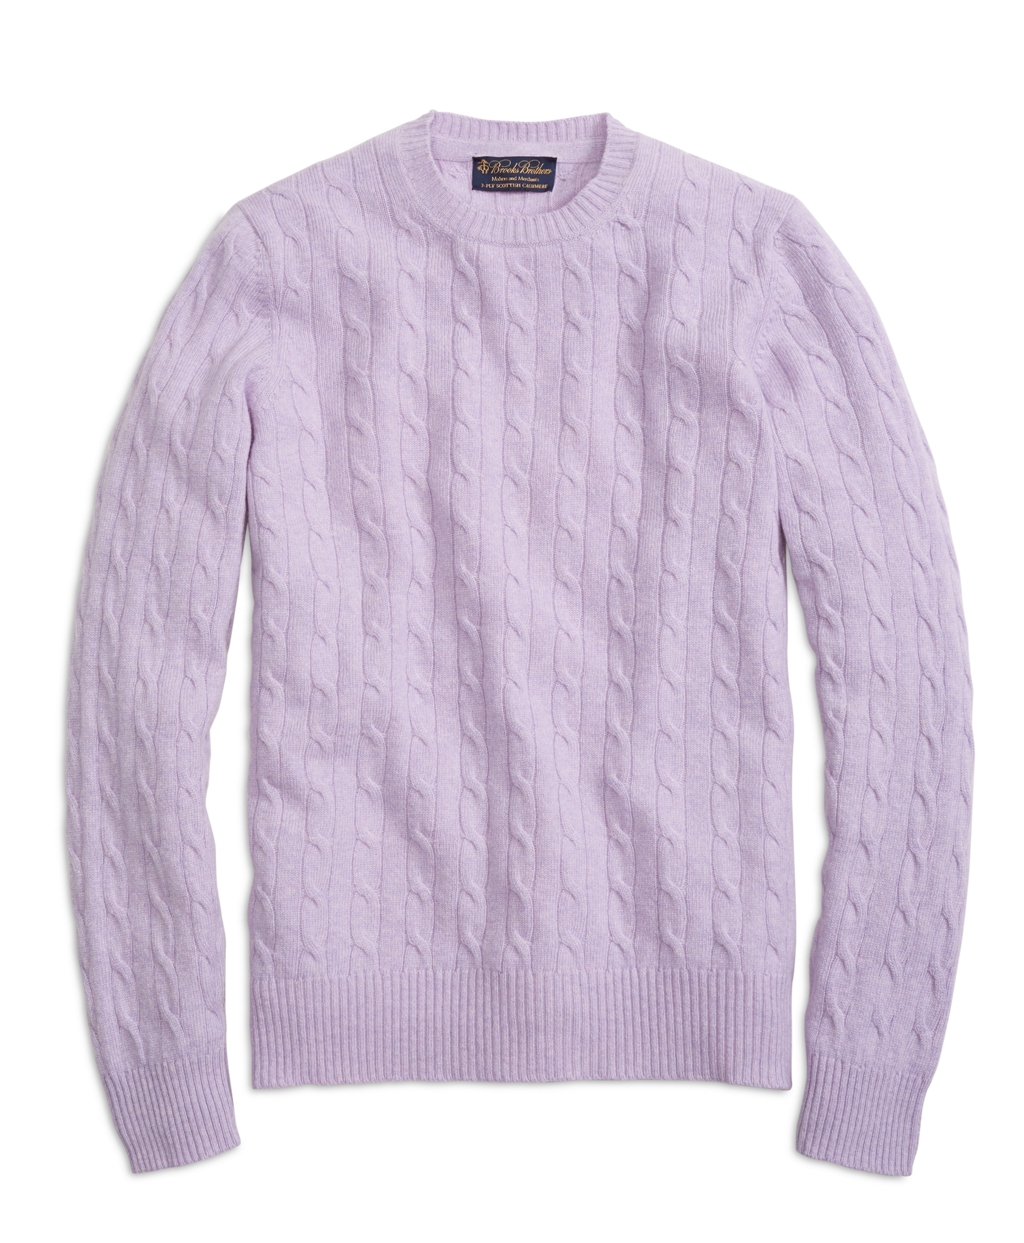 Brooks brothers Cashmere Cable Crewneck Sweater in Purple for Men ...